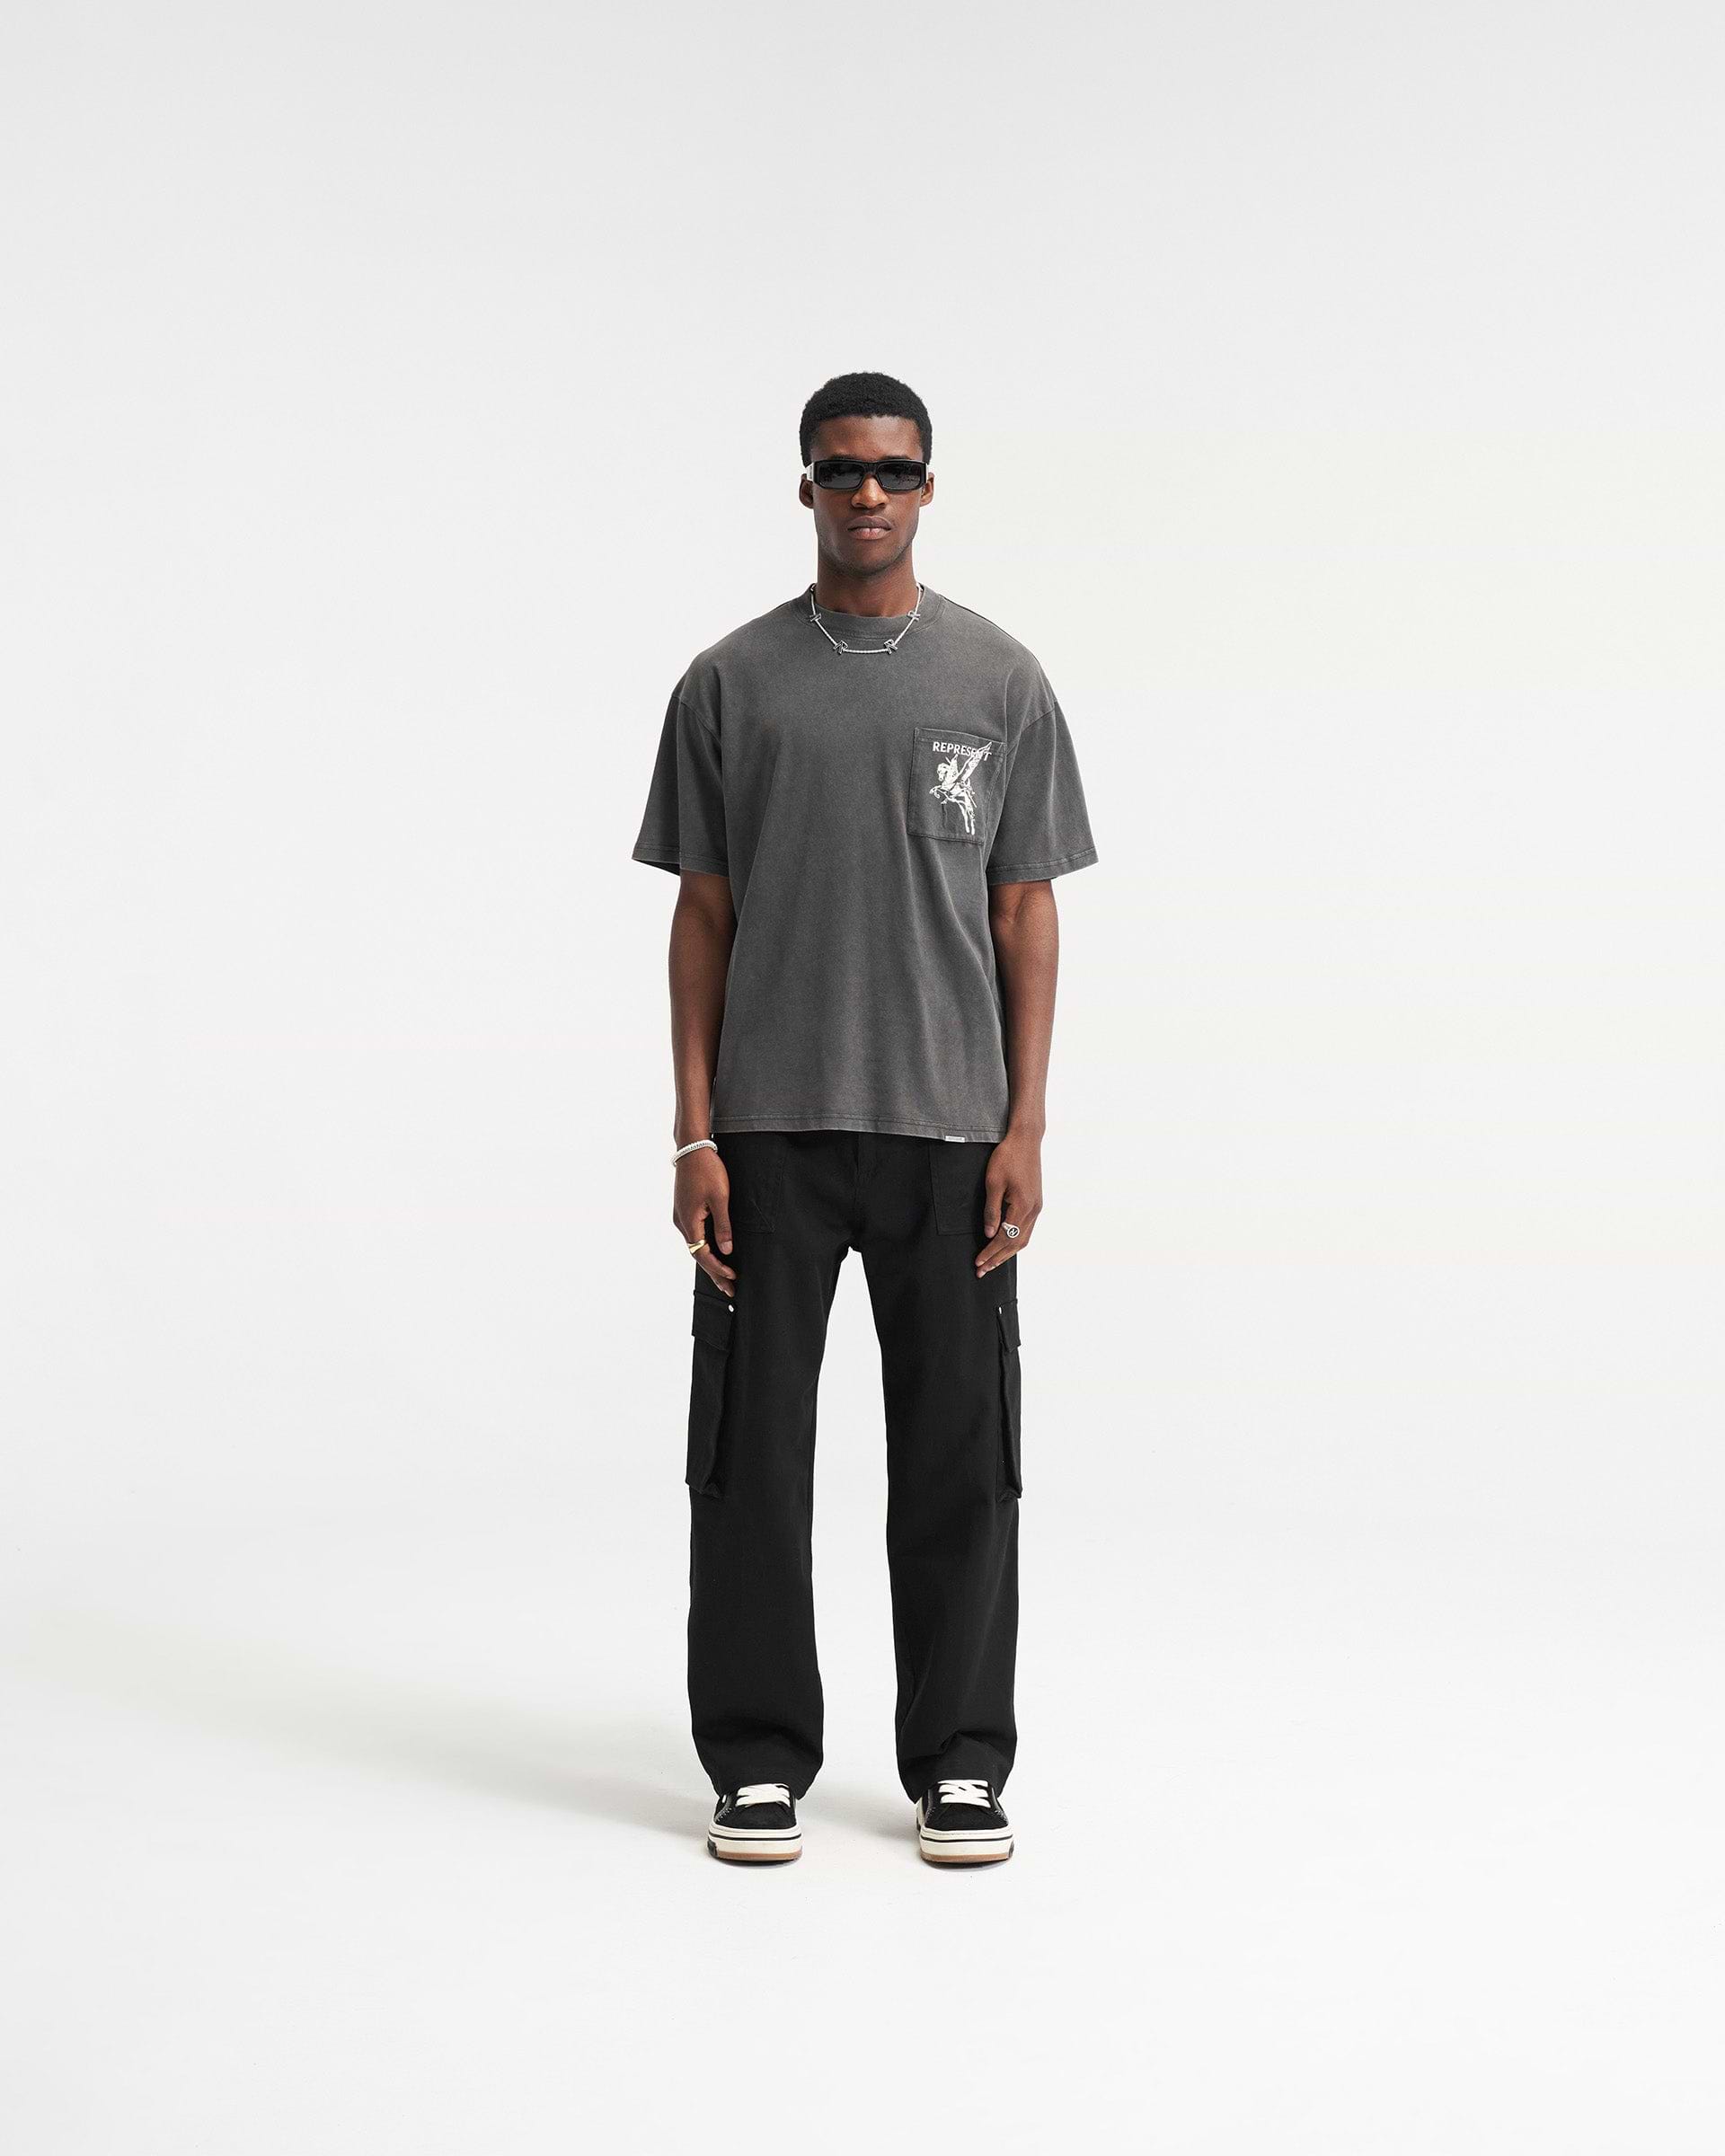 402) The REPRESENT CLASSIC U Tee - Limited Edition